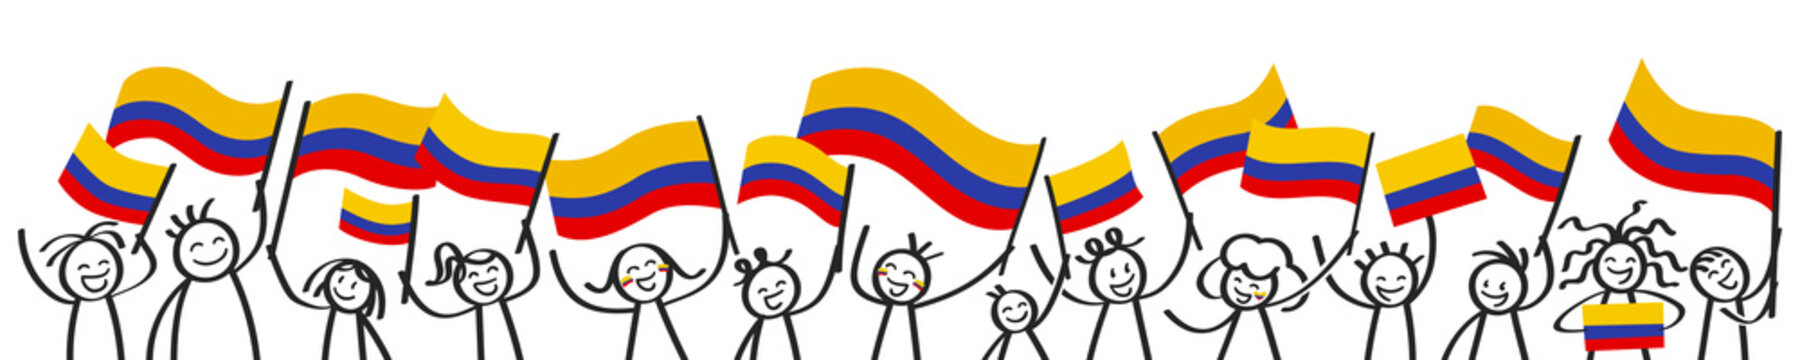 Cheering crowd of happy stick figures with Colombian national flags, smiling Colombia supporters, sports fans isolated on white background